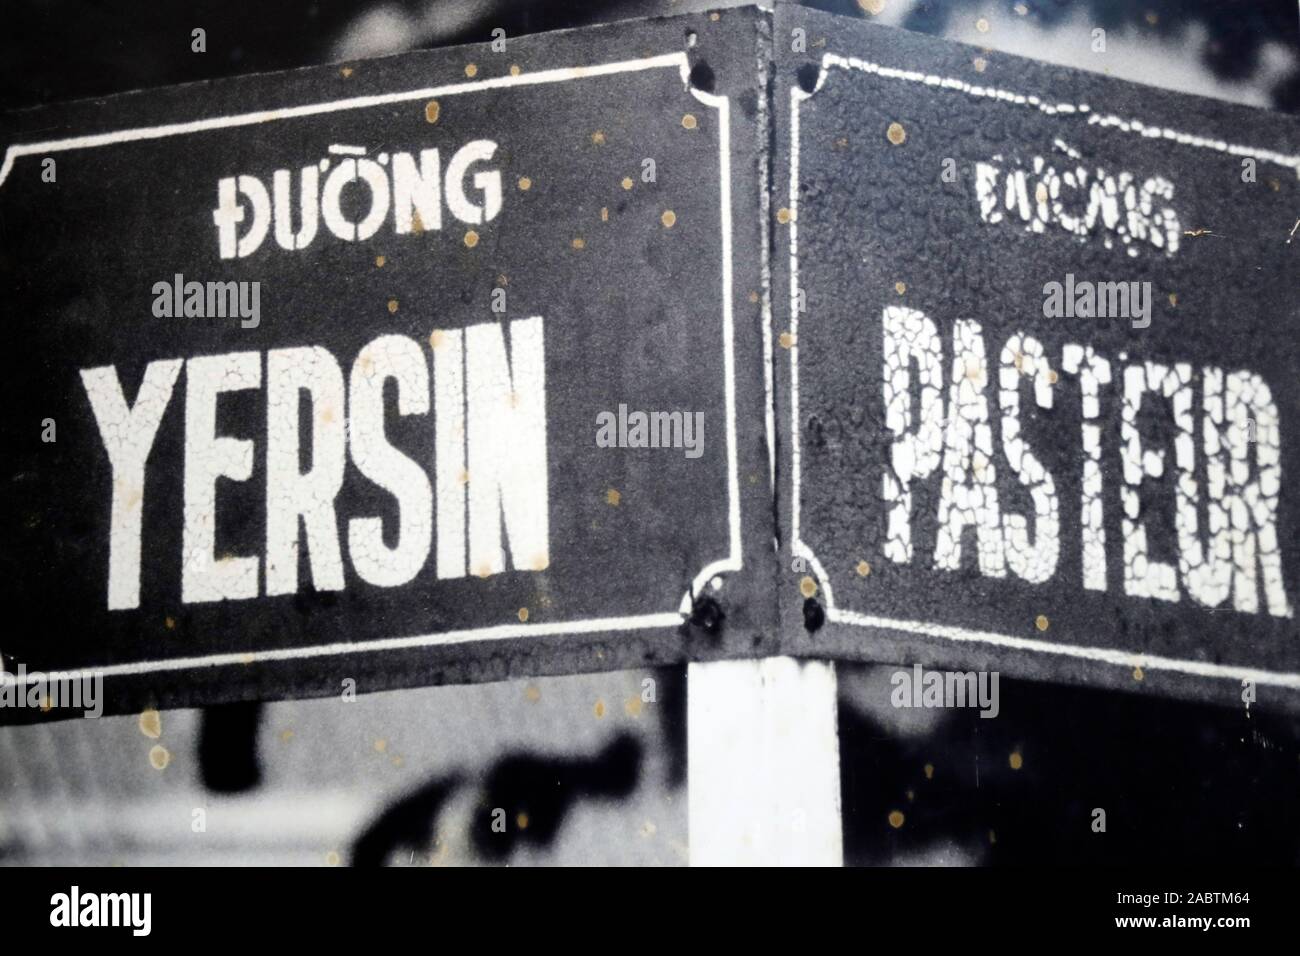 Pasteur and Yersin streets. Old signs.  Nha Trang. Vietnam. Stock Photo